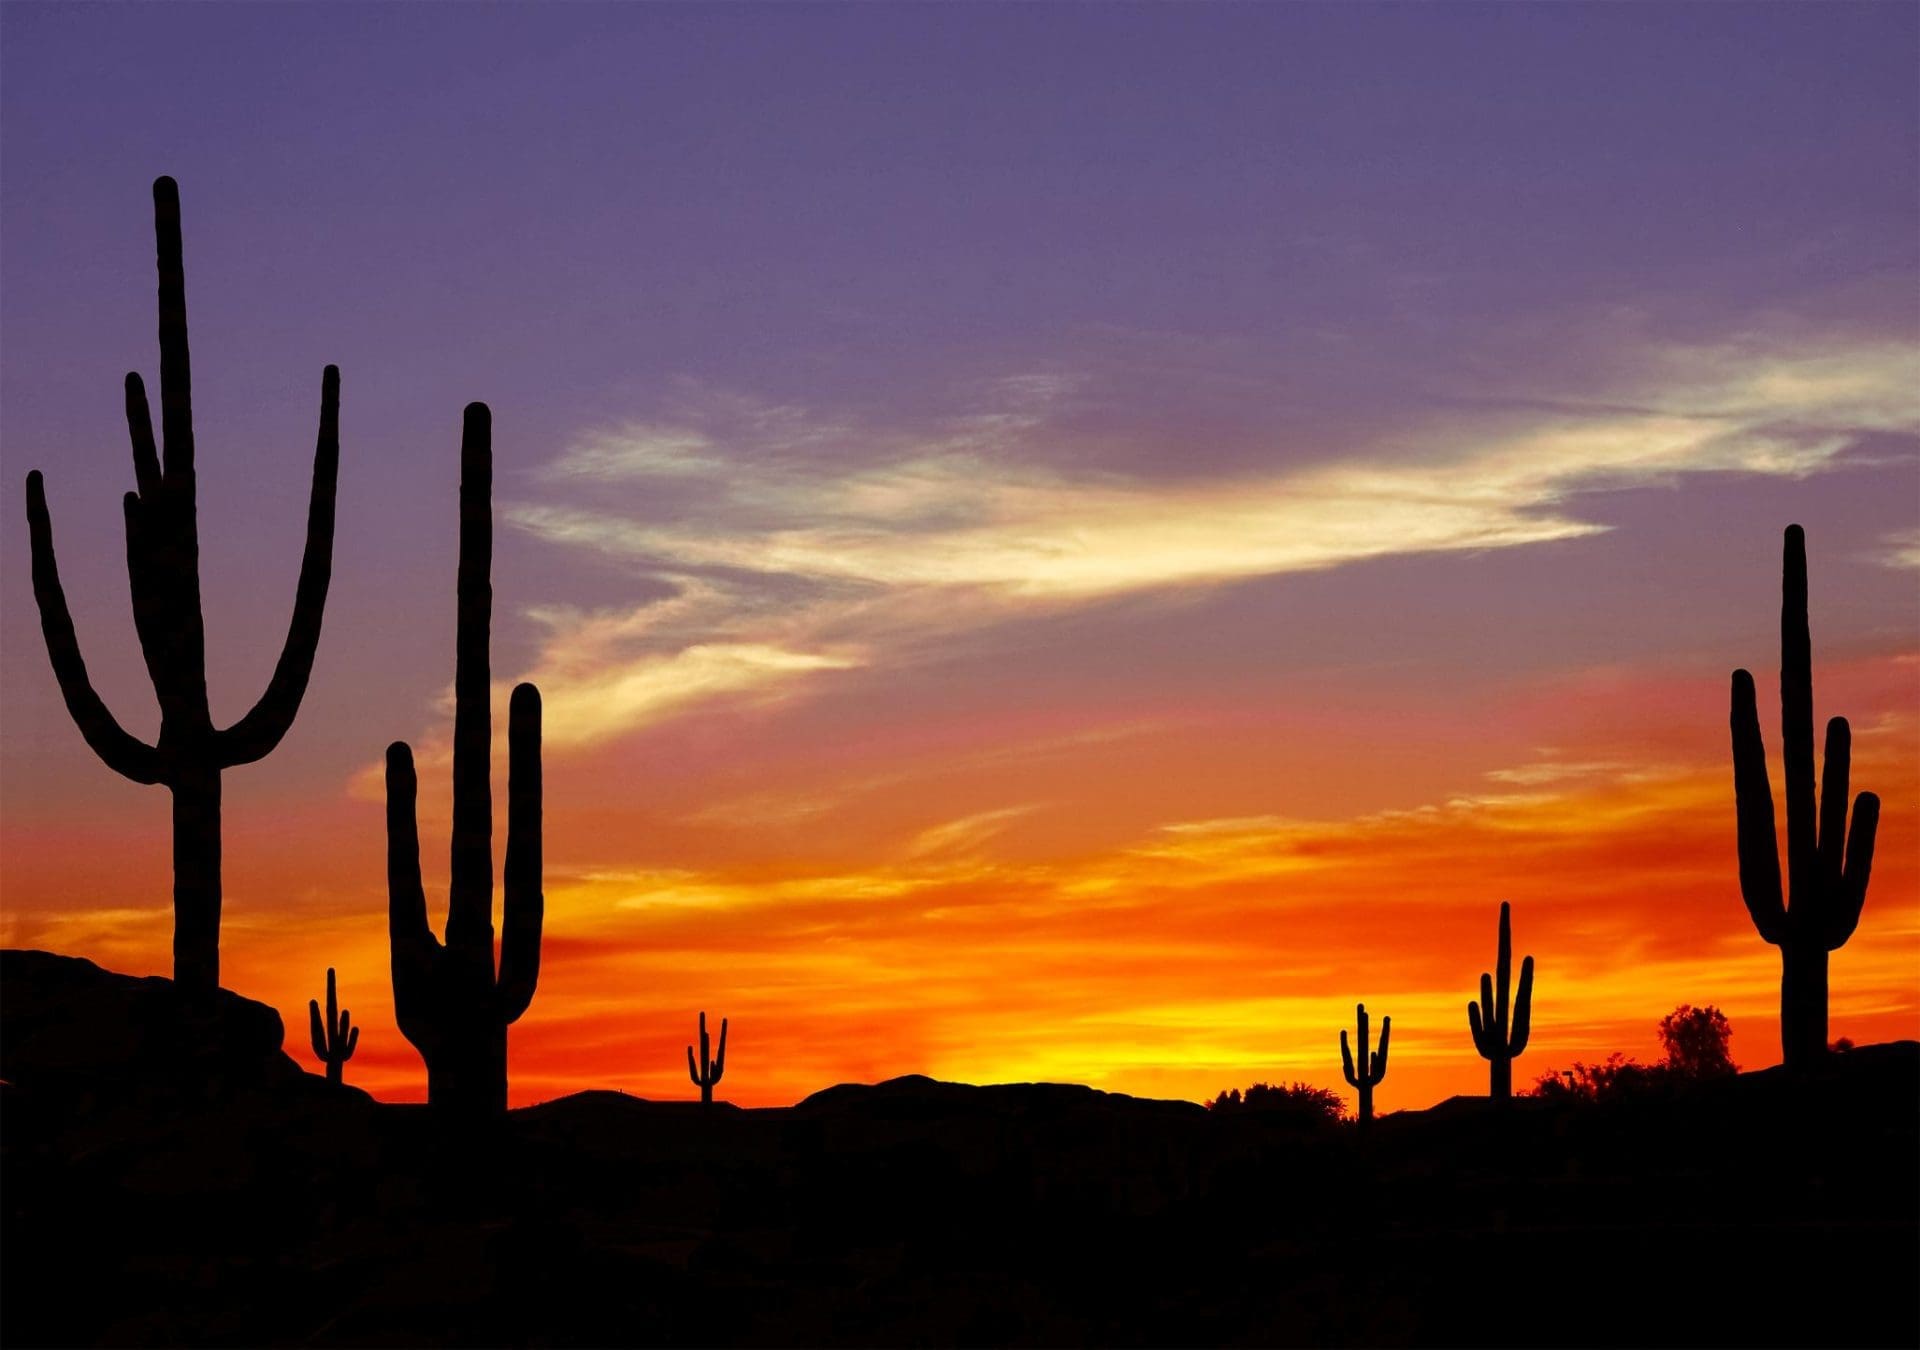 What Should I See in Saguaro National Park?